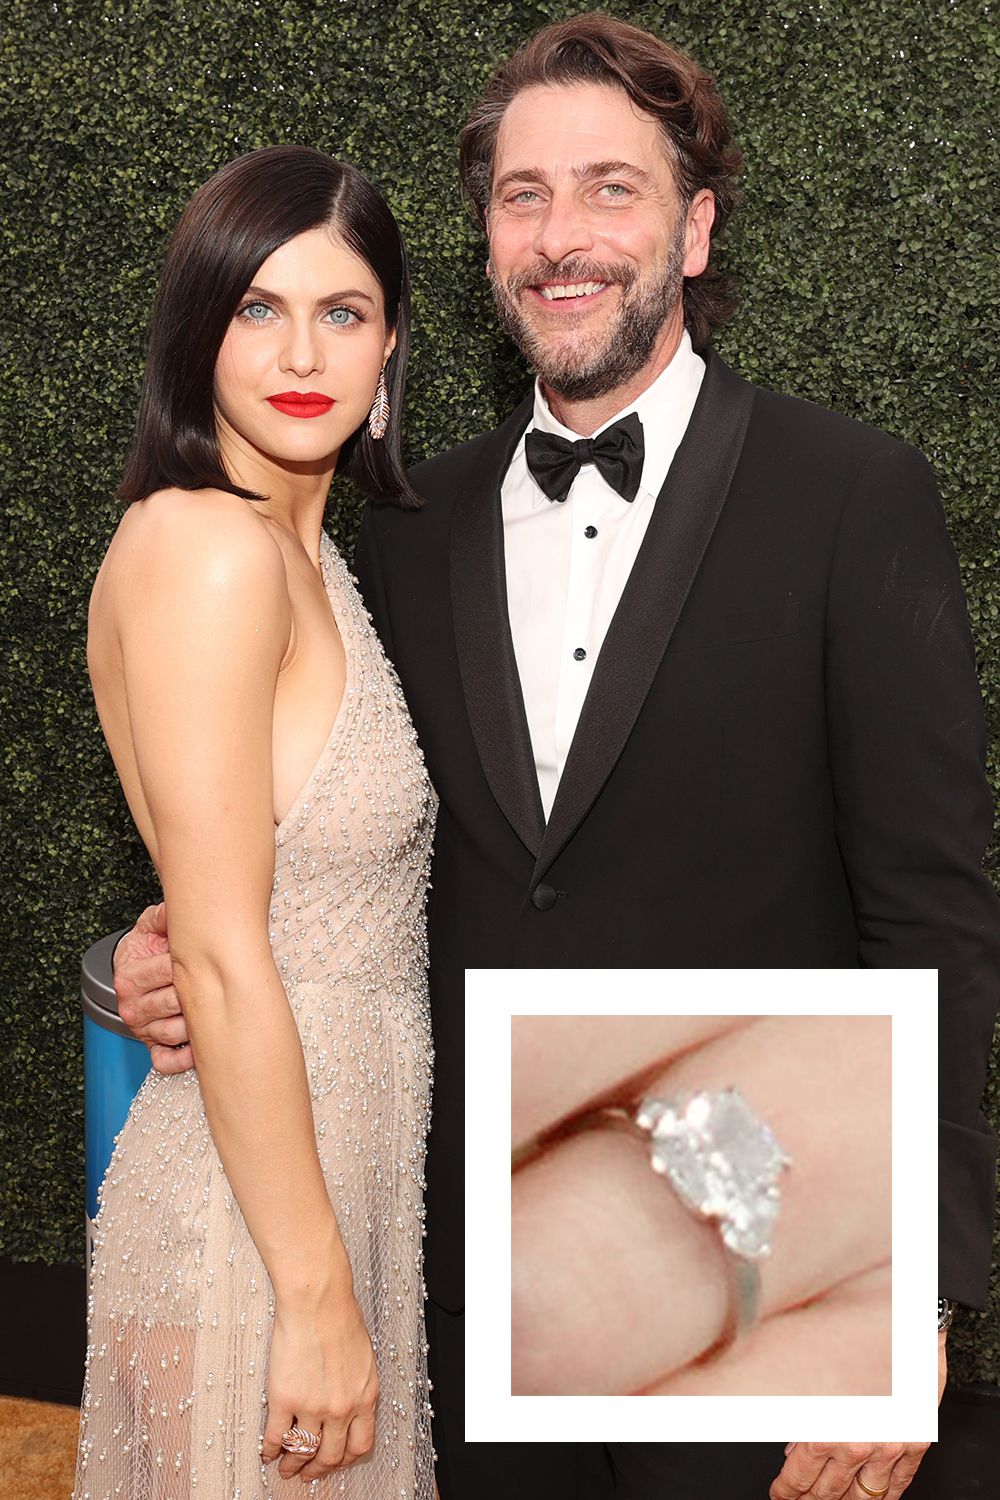 The 5 celebrity rings we can't stop talking about | Digital Magazine